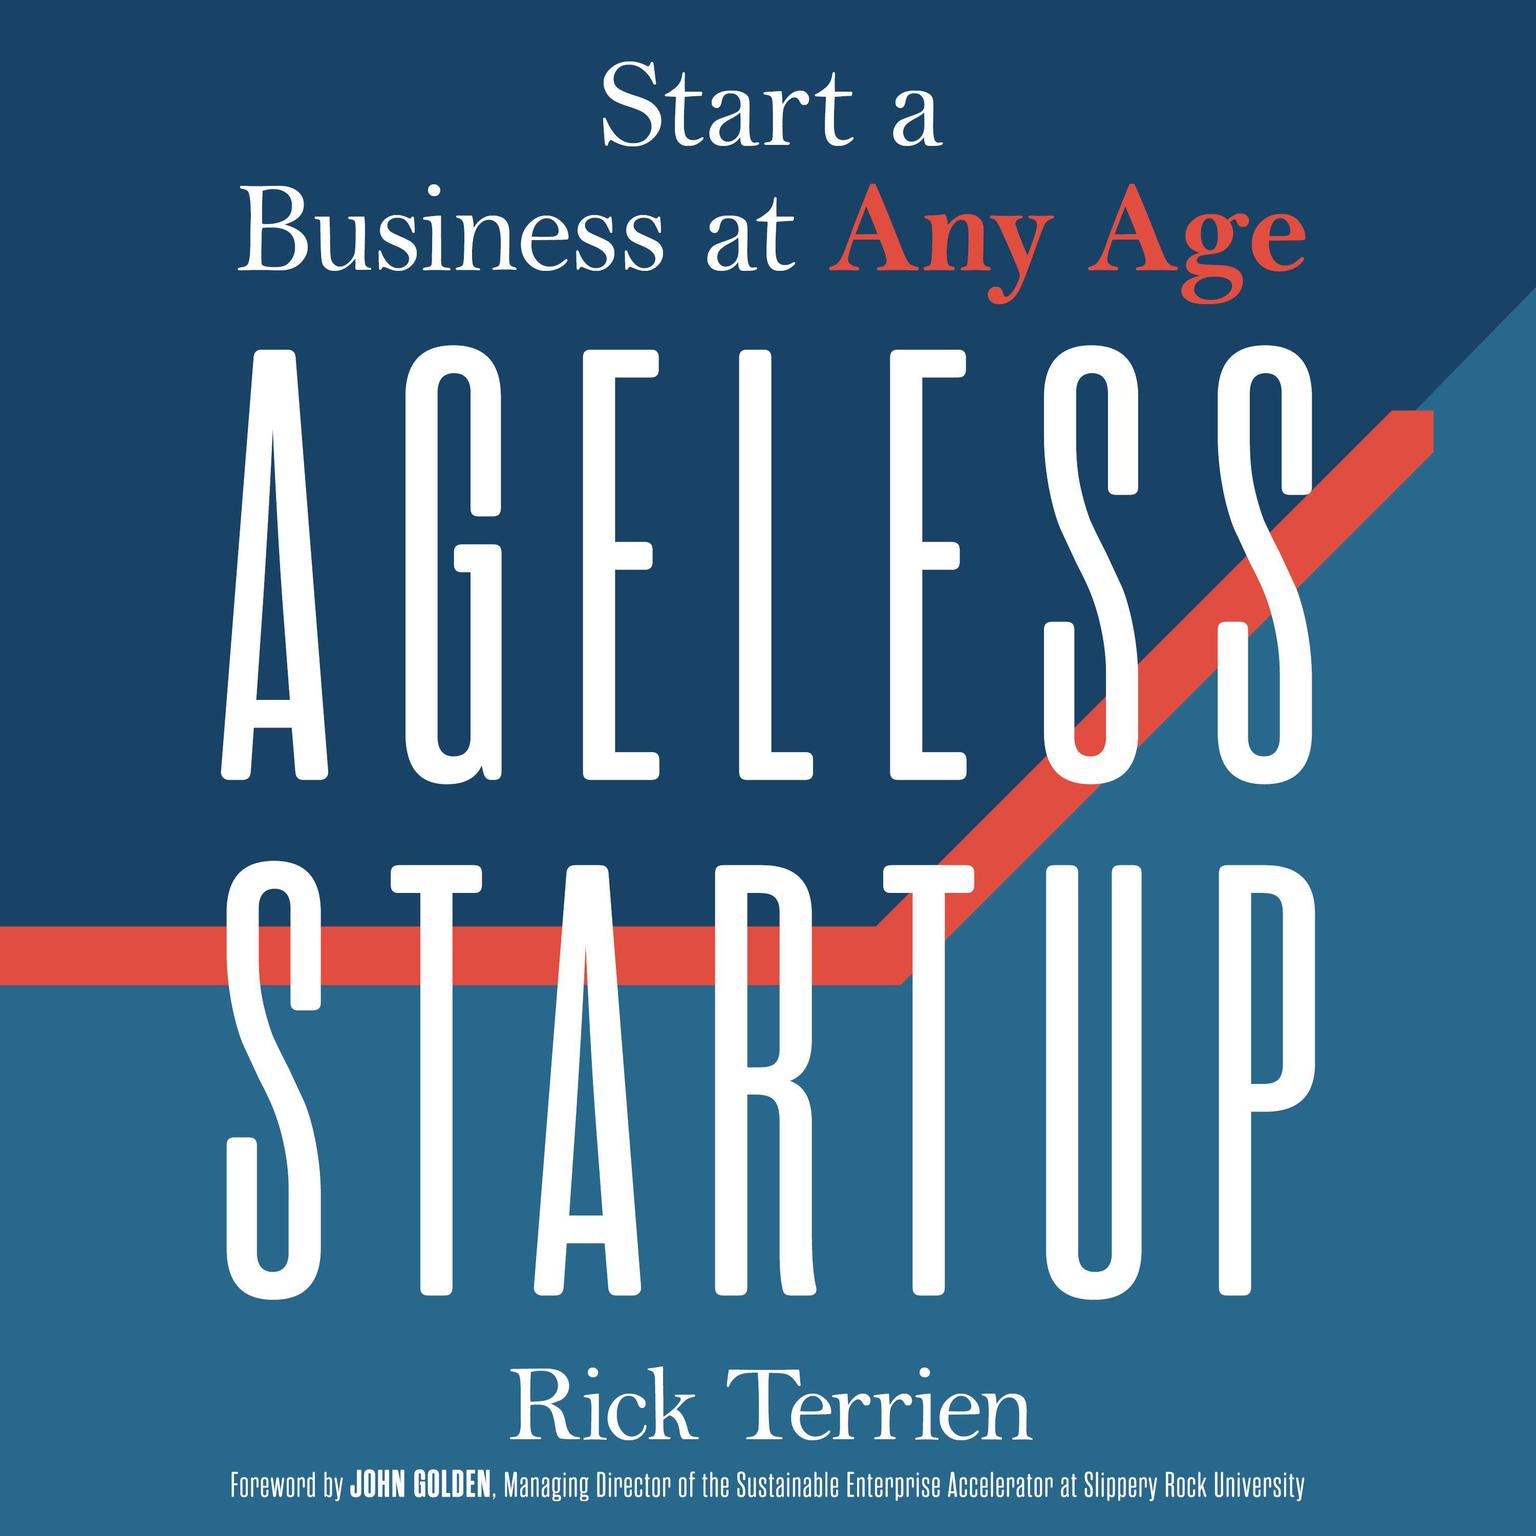 Ageless Startup: Start a Business at Any Age Audiobook, by Rick Terrien